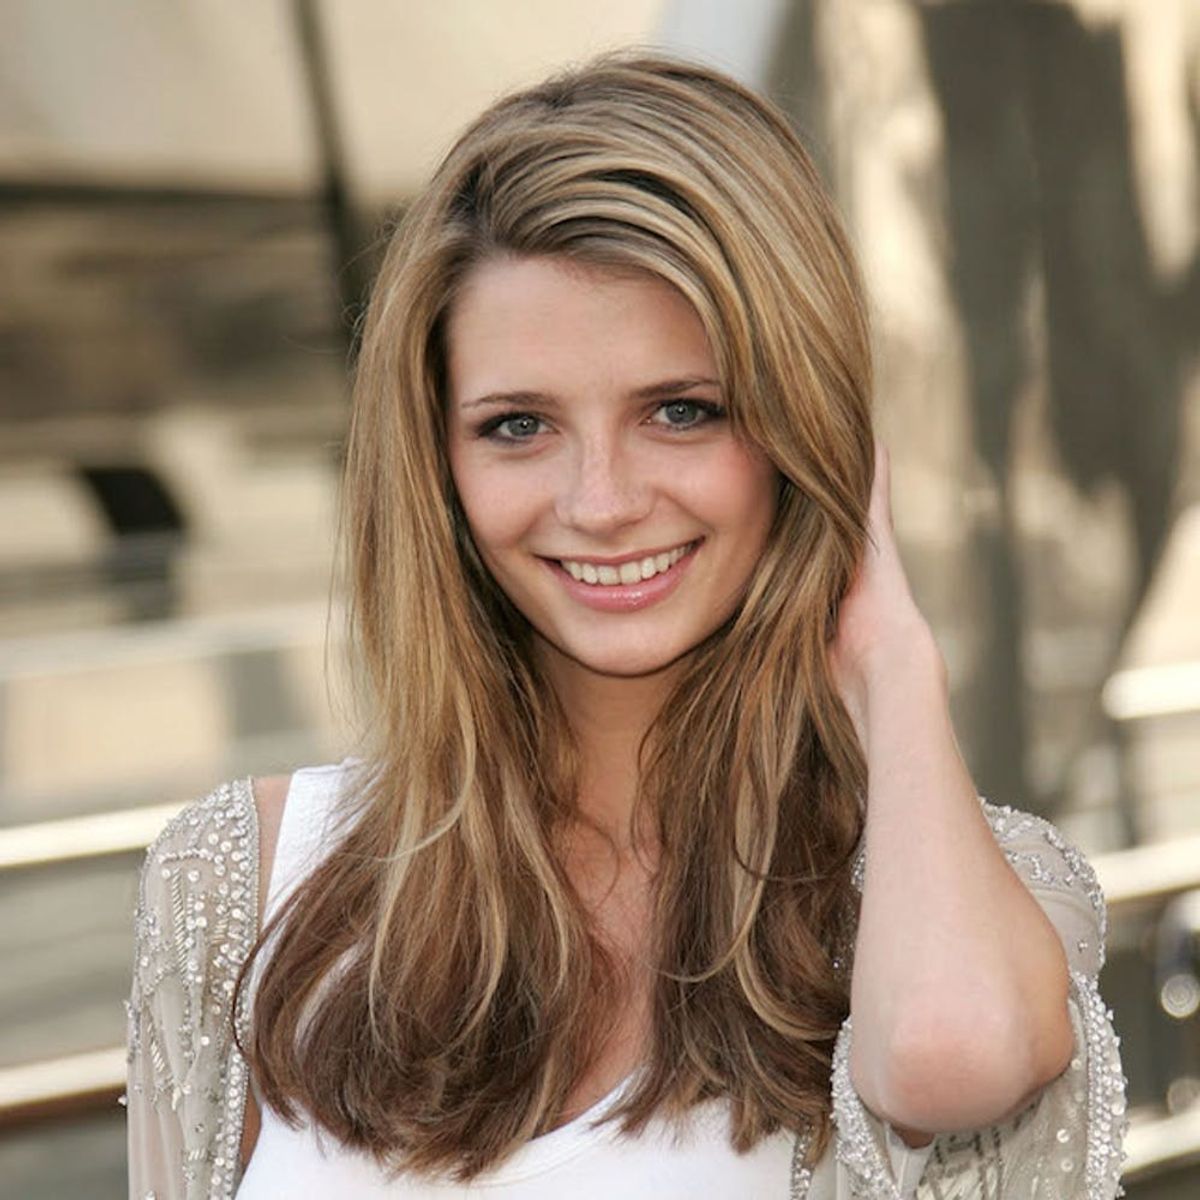 Mischa Barton’s New Pic Is What Every O.C. Fan Has Been Waiting For